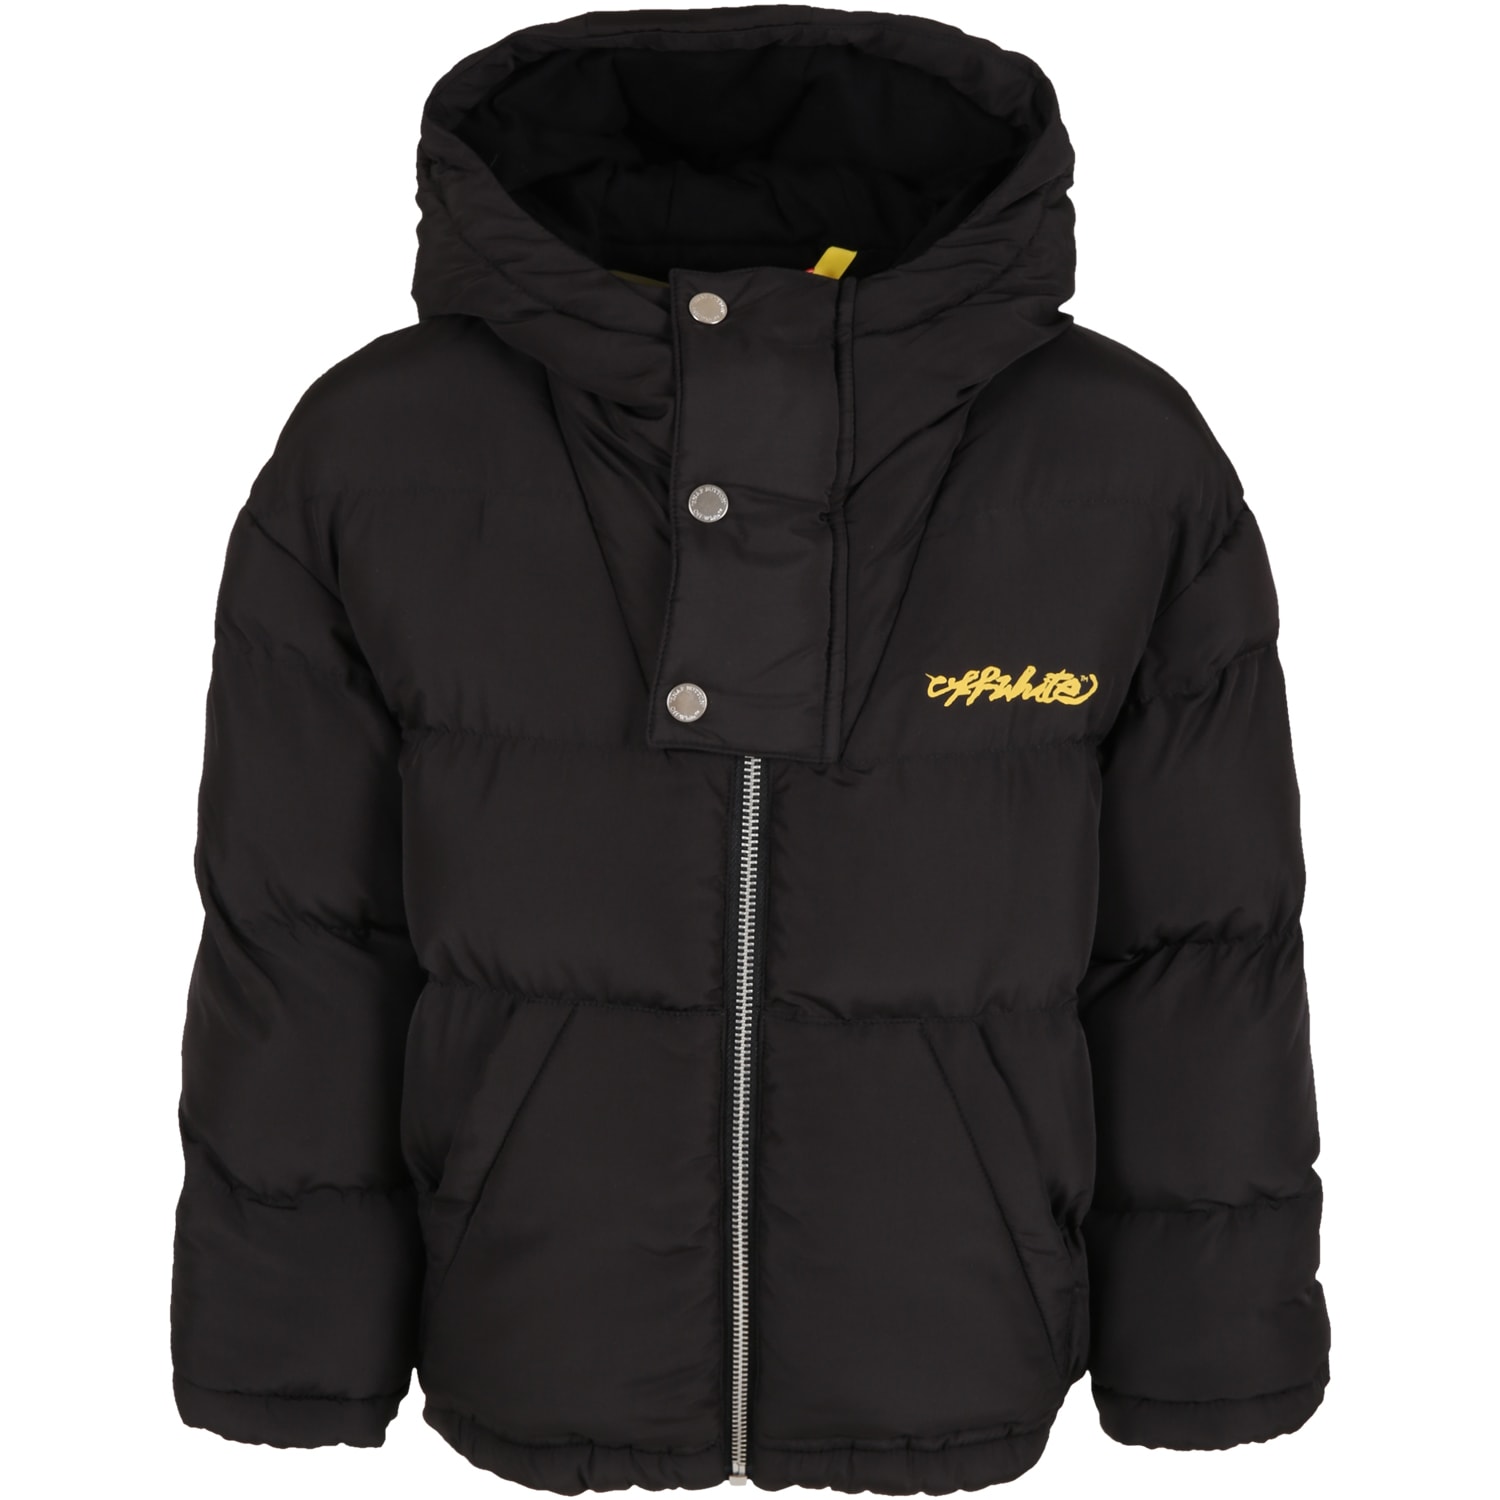 OFF-WHITE BLACK JACKET FOR KIDS WITH LOGO,OBEA001F21FAB003 1018